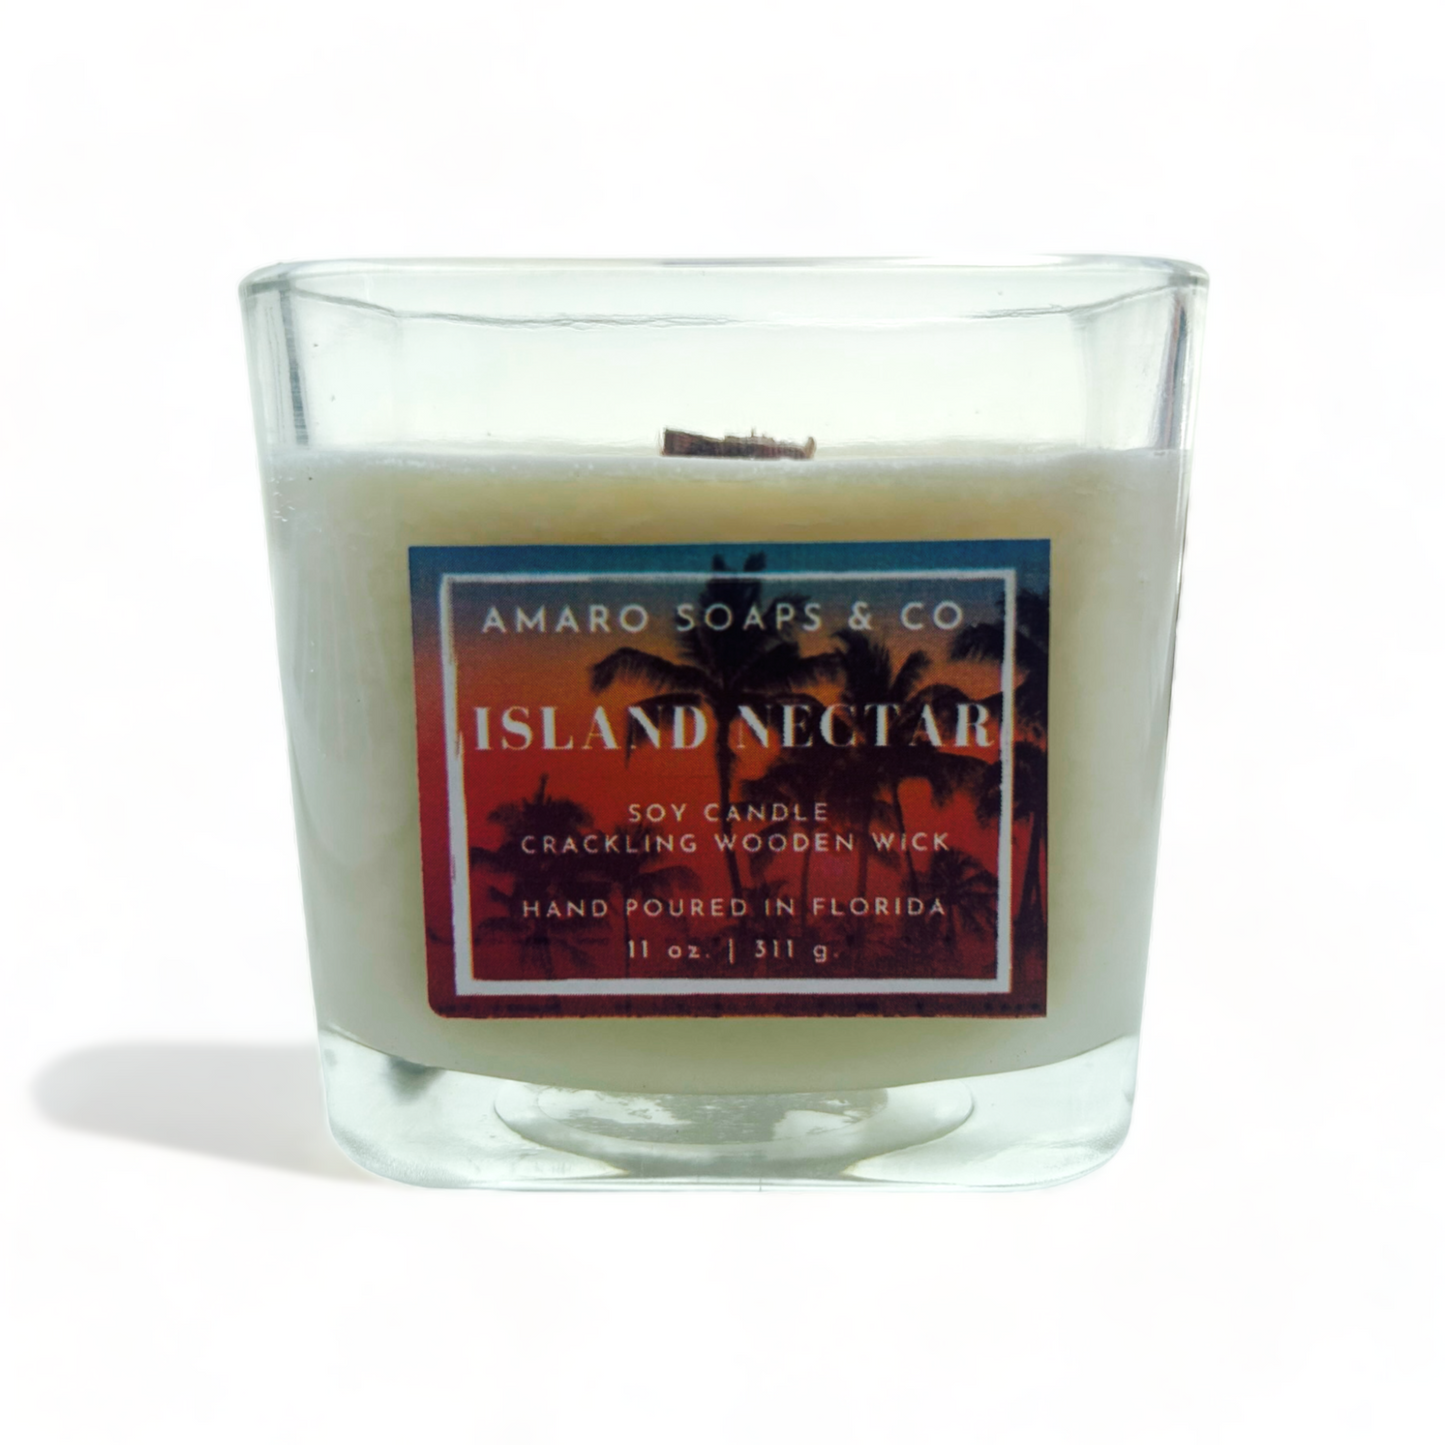 Island Nectar Wooden Wick Soy Candle